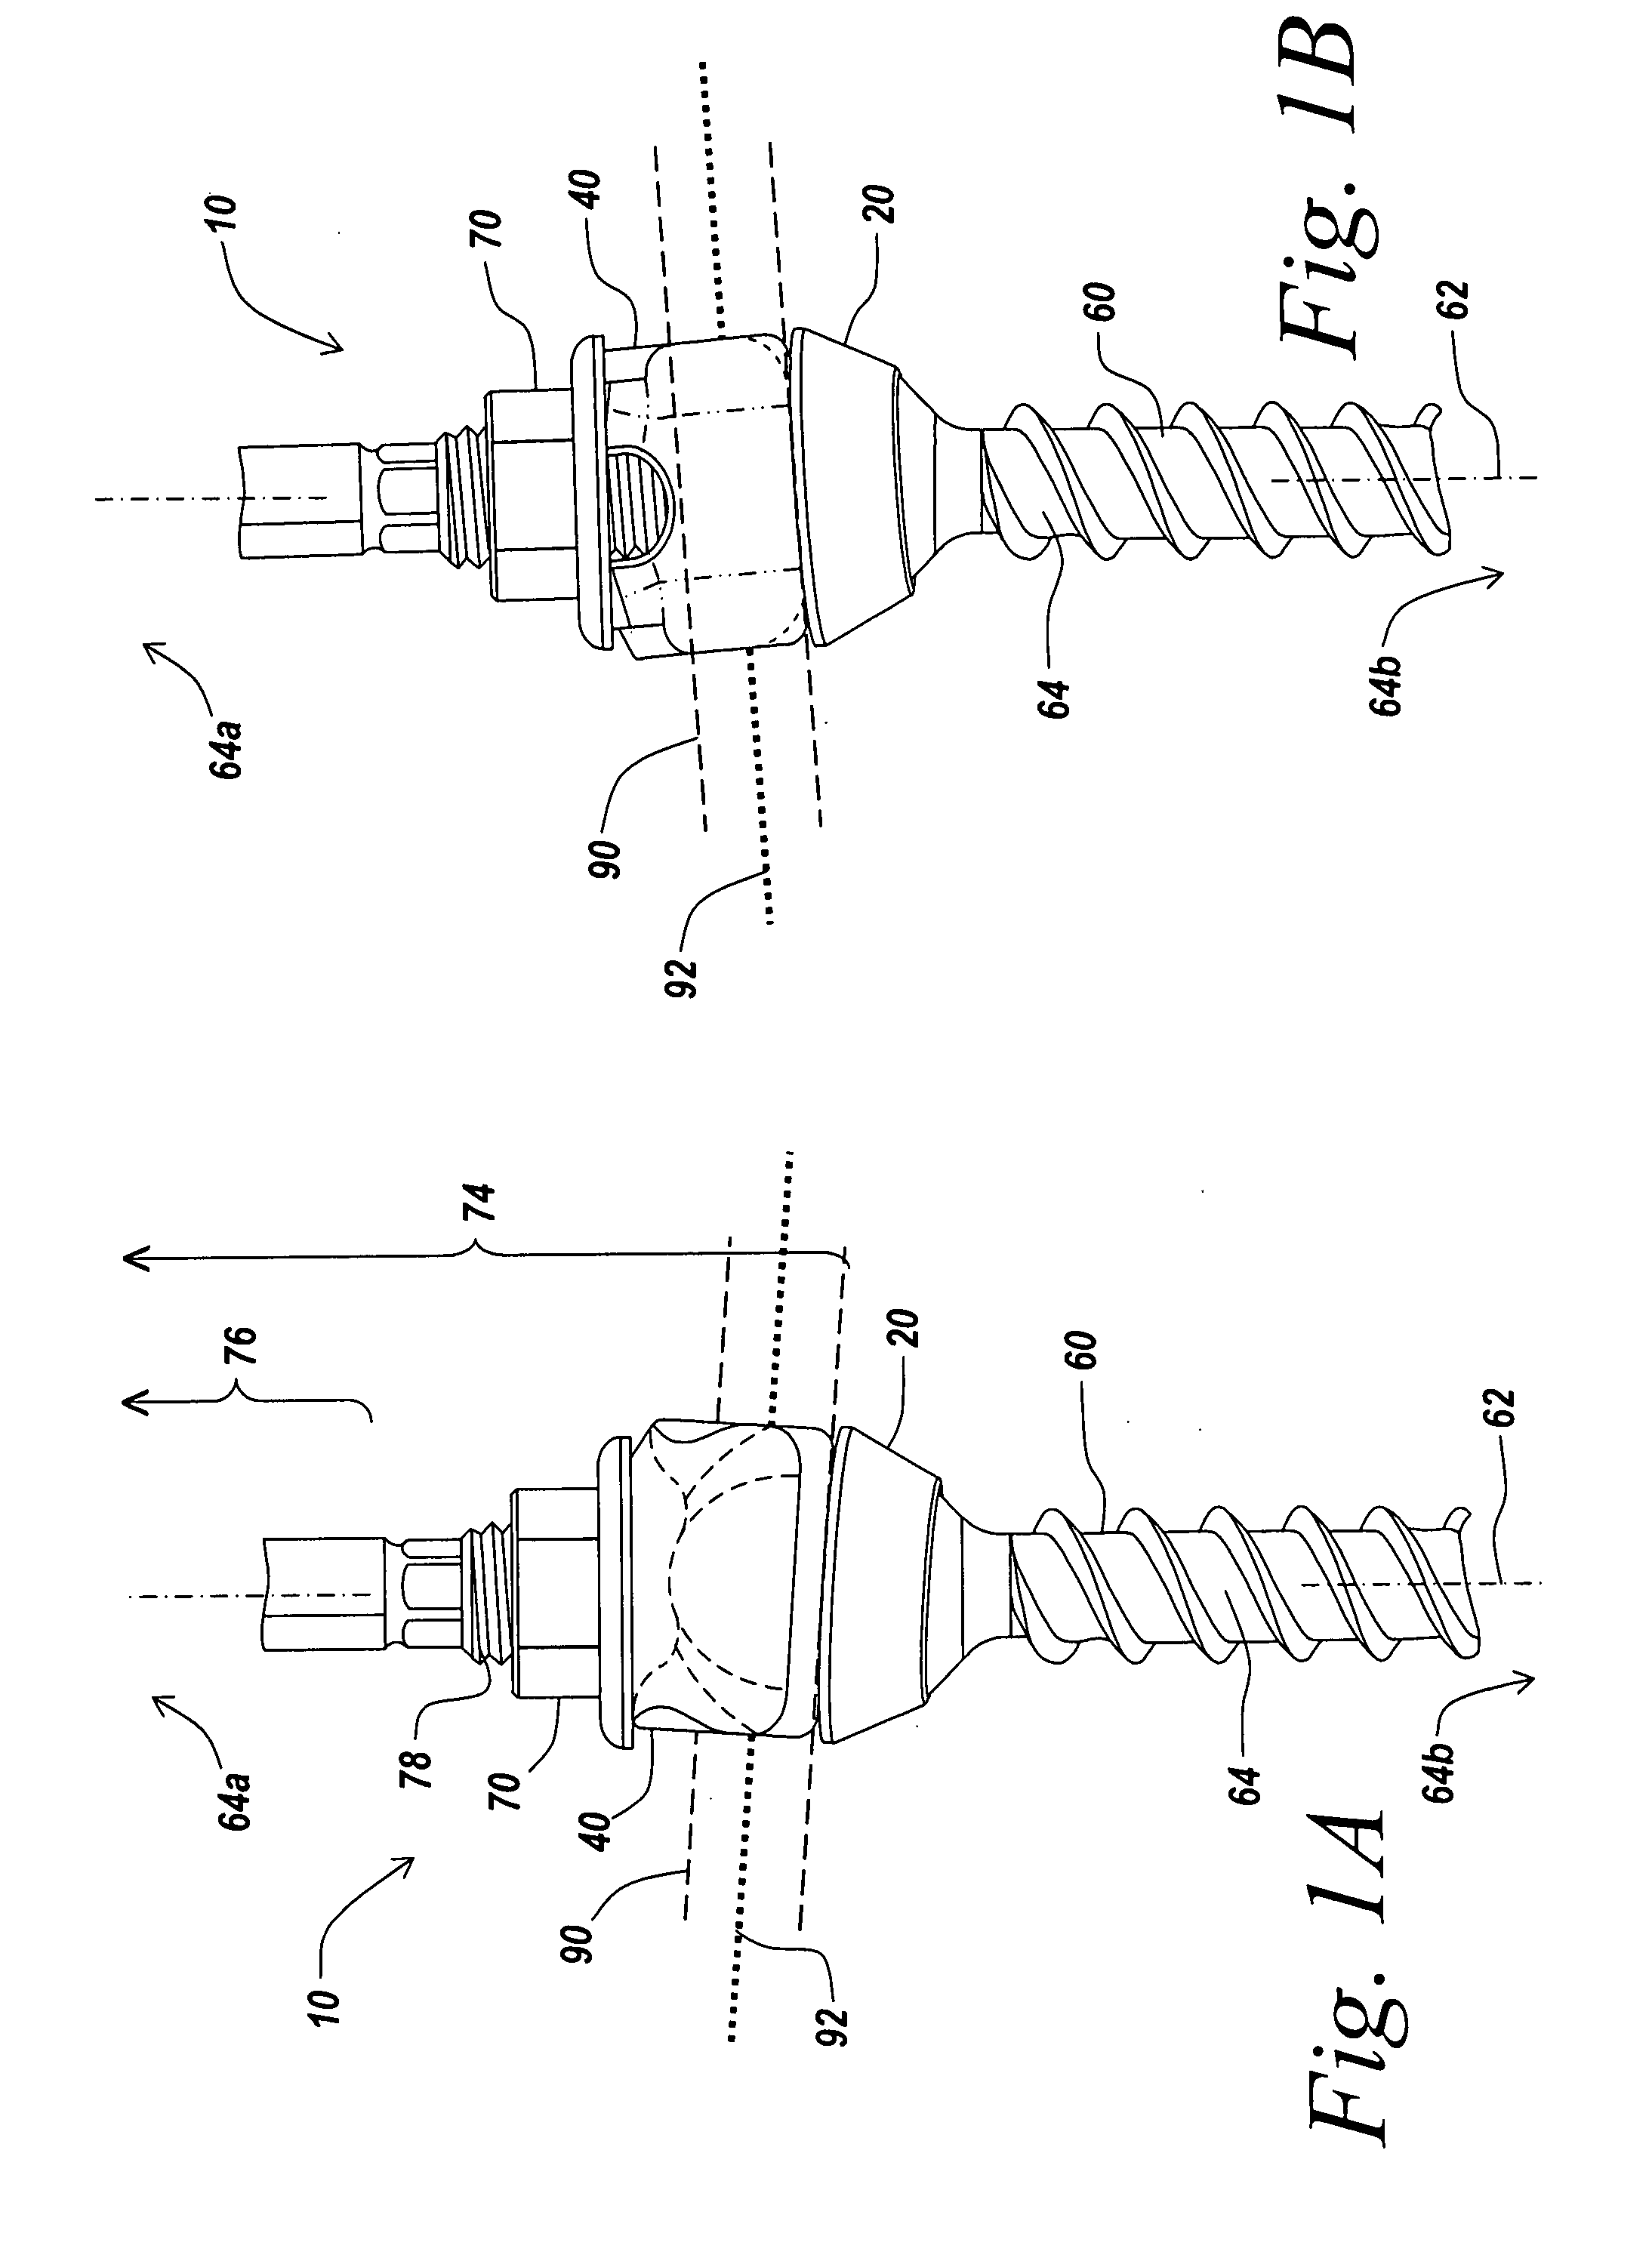 Adaptable clamping mechanism for coupling a spinal fixation element to a bone anchor